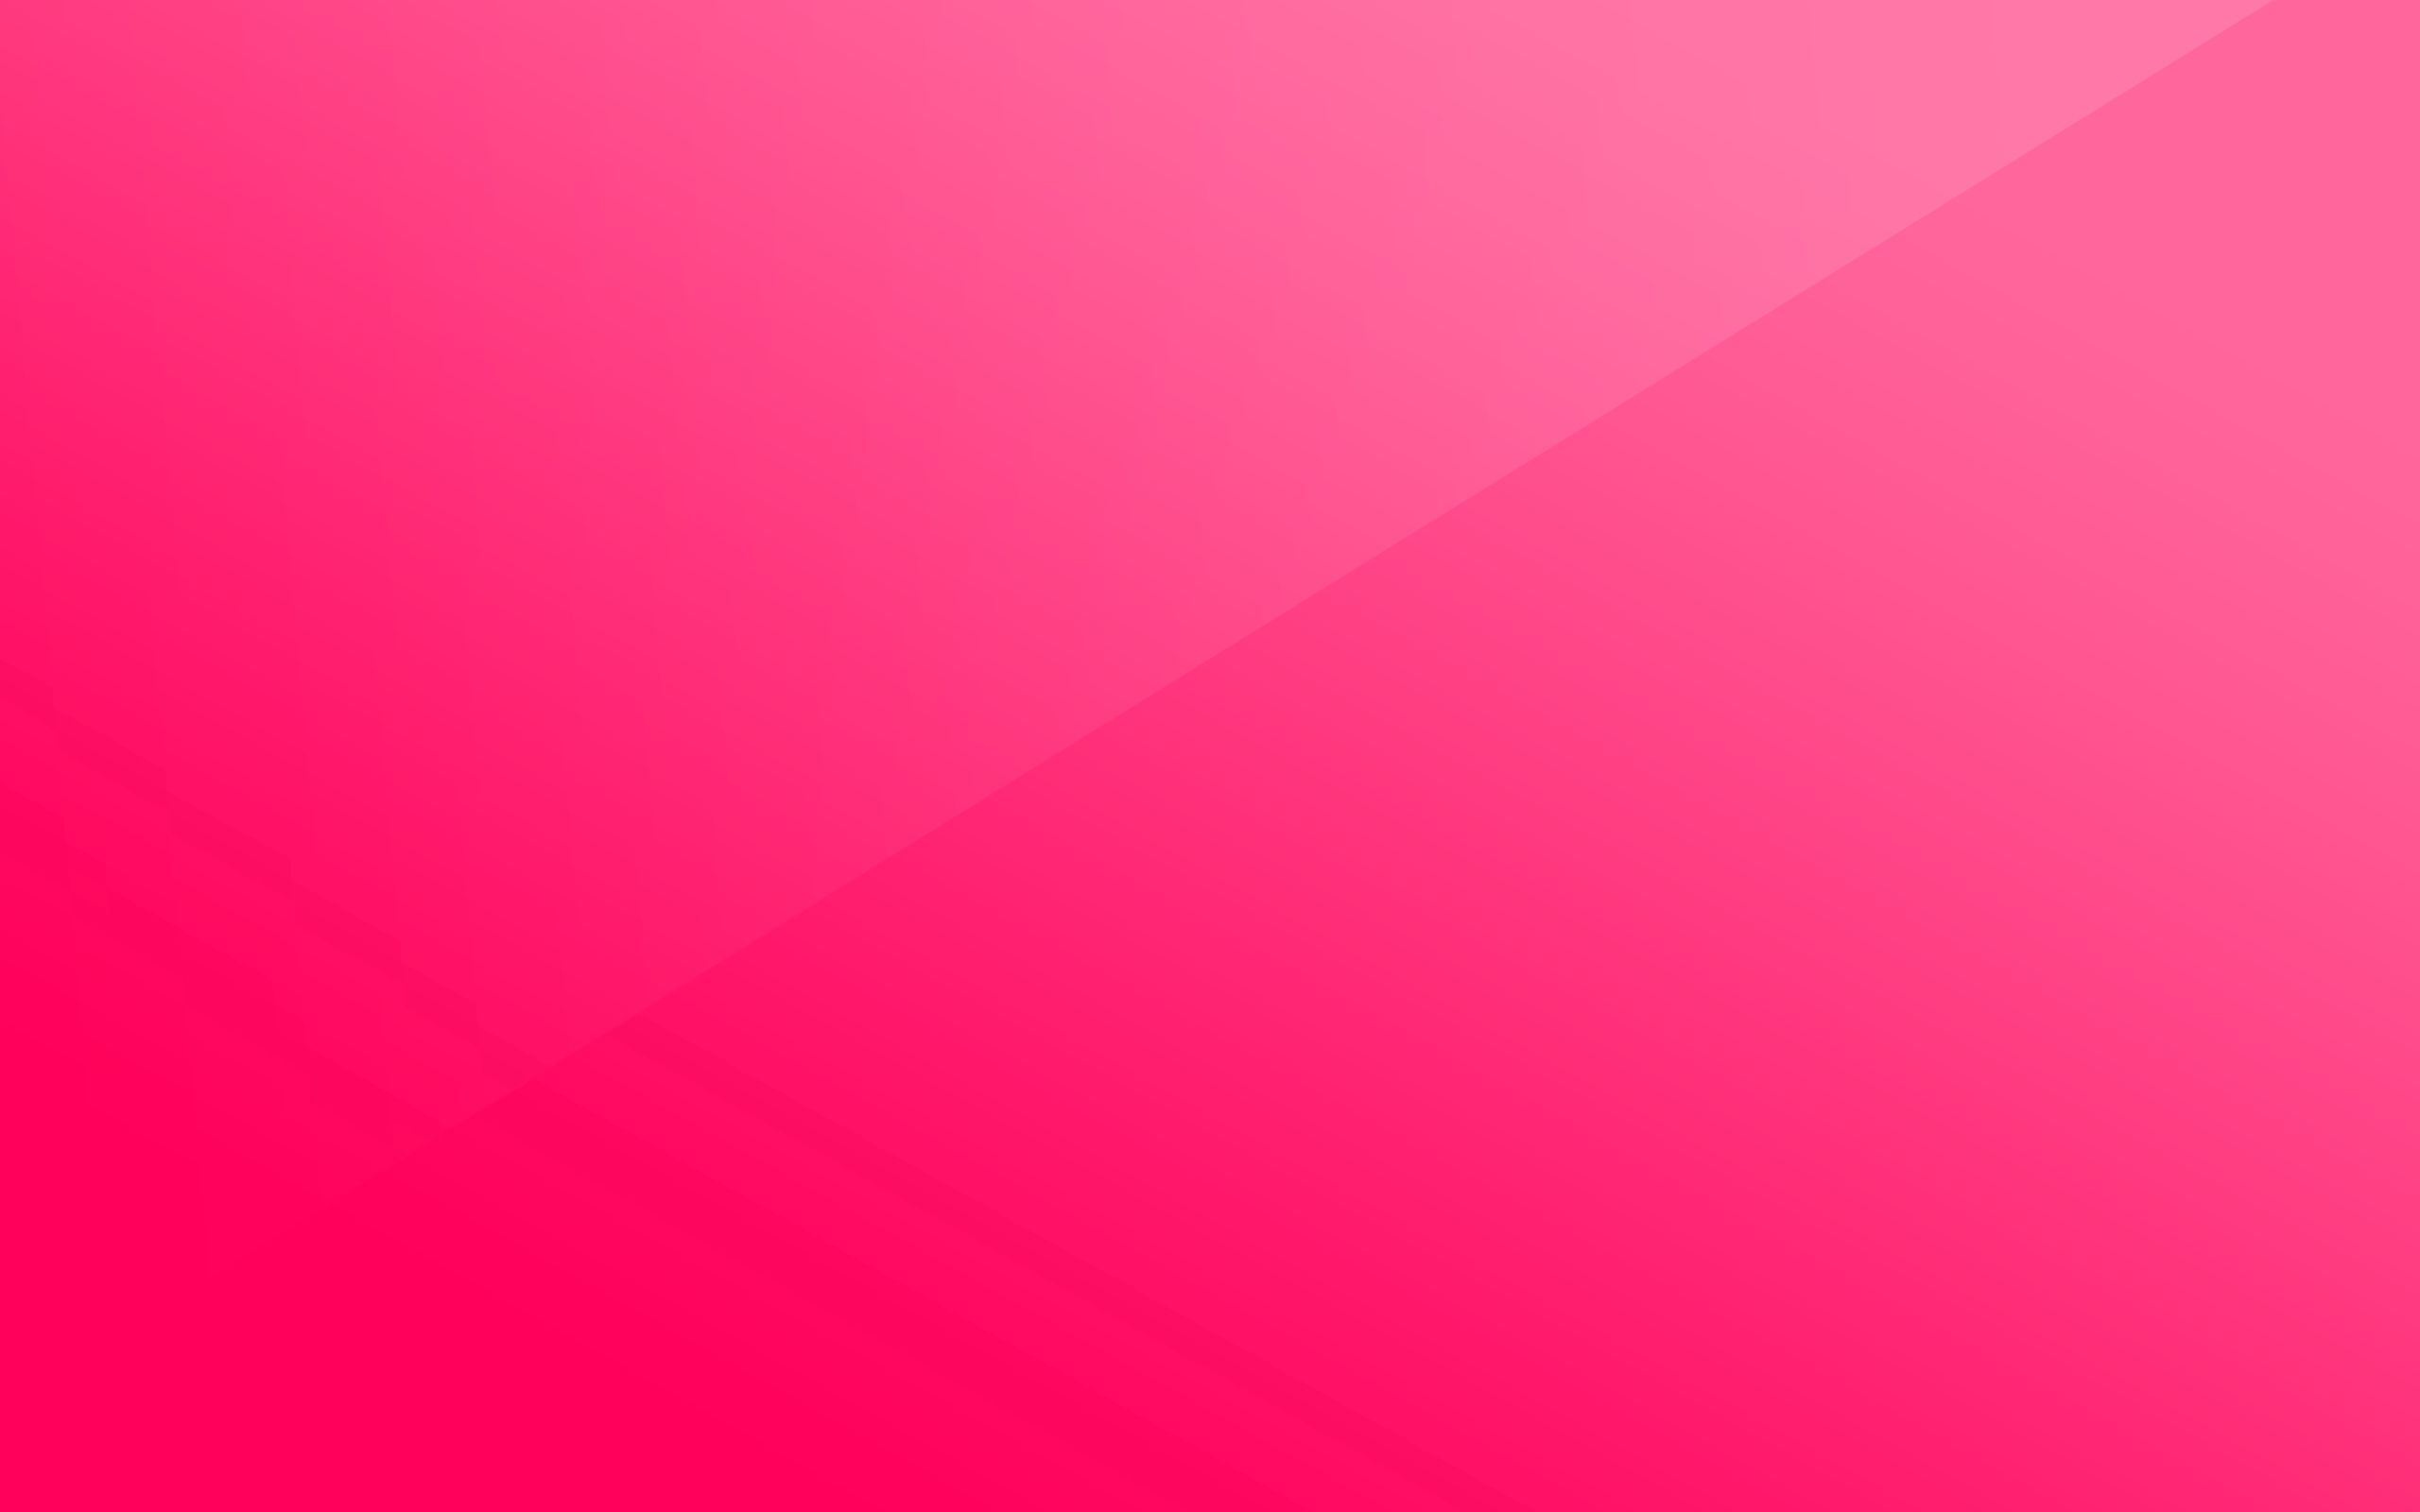 HD Pink Android Images